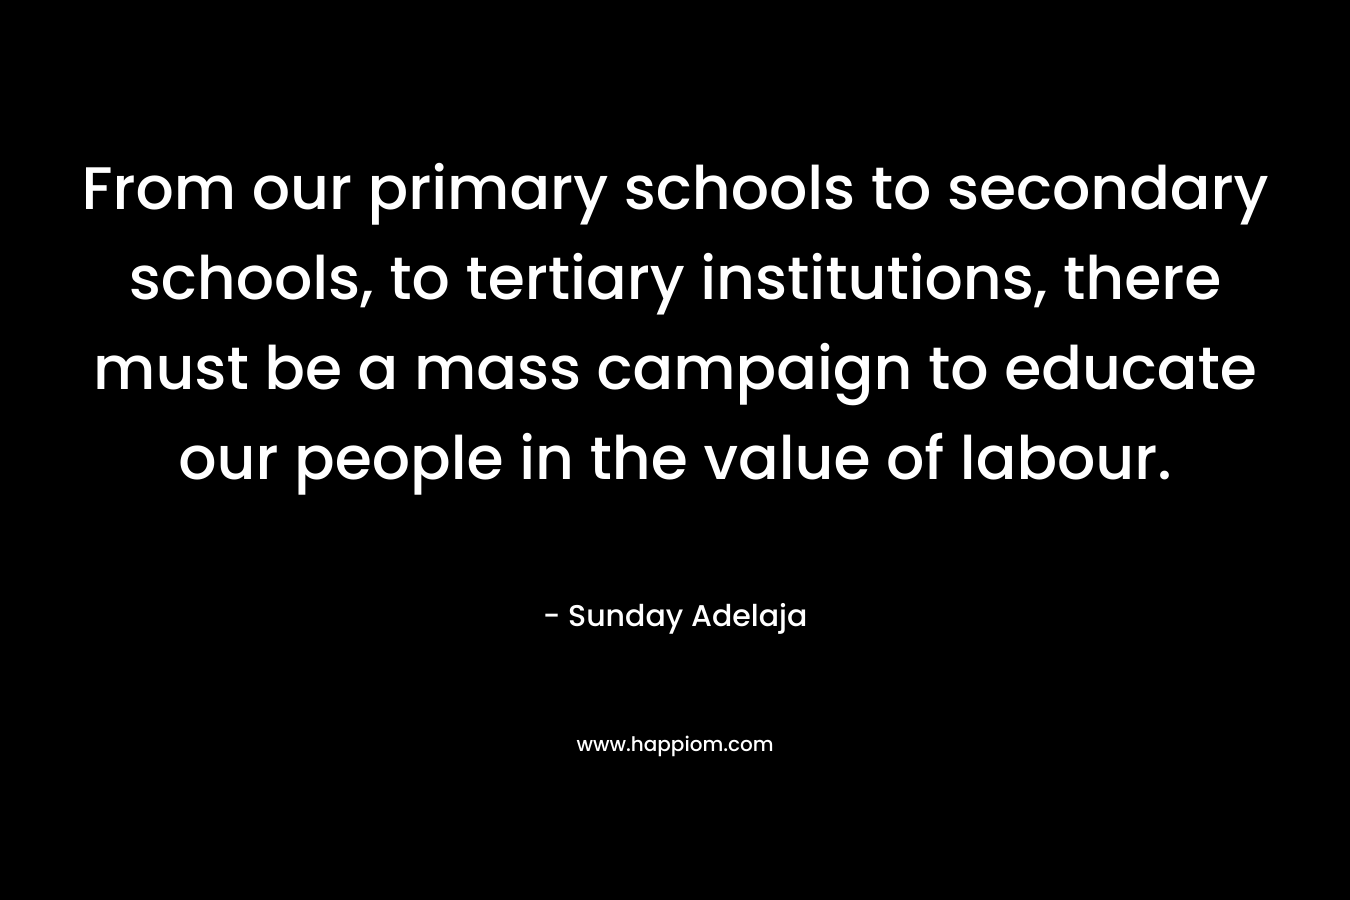 From our primary schools to secondary schools, to tertiary institutions, there must be a mass campaign to educate our people in the value of labour. – Sunday Adelaja